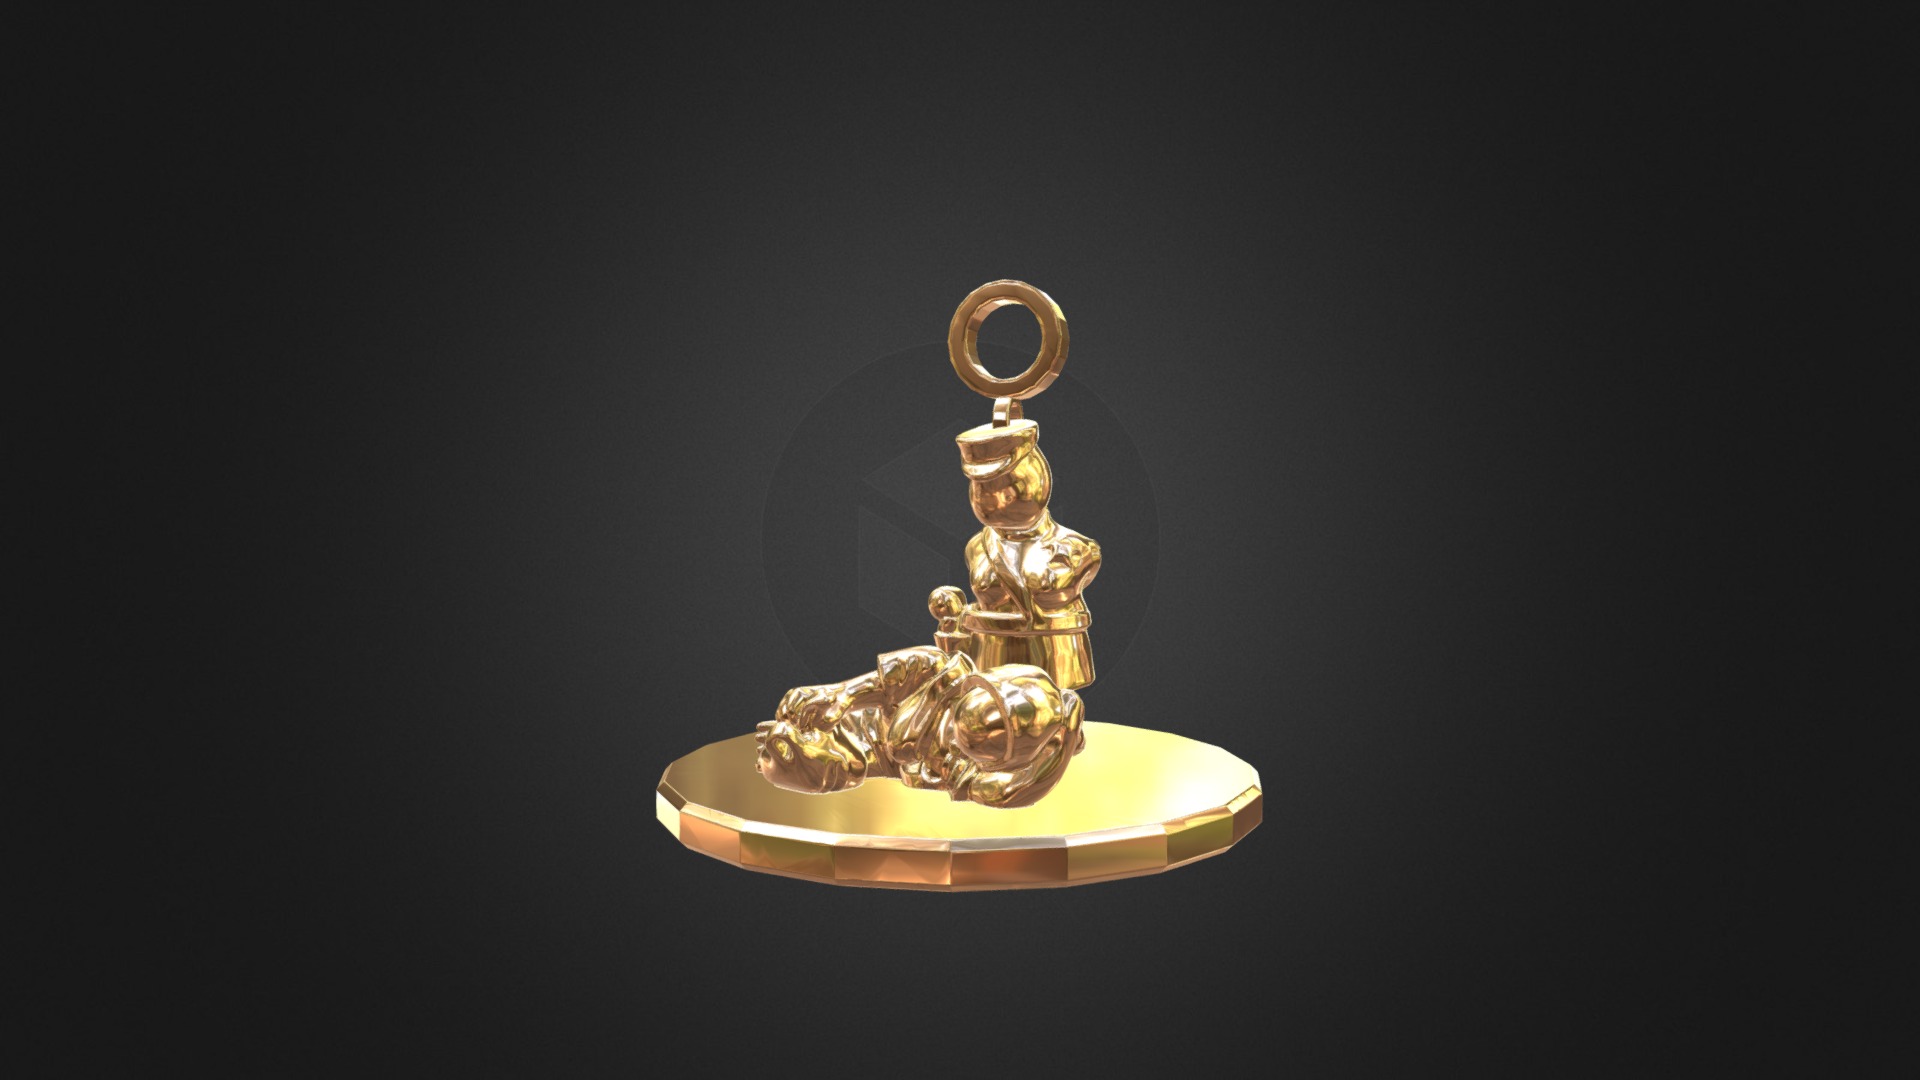 3D model New York City Sculpture Keychain - This is a 3D model of the New York City Sculpture Keychain. The 3D model is about a gold and silver statue.